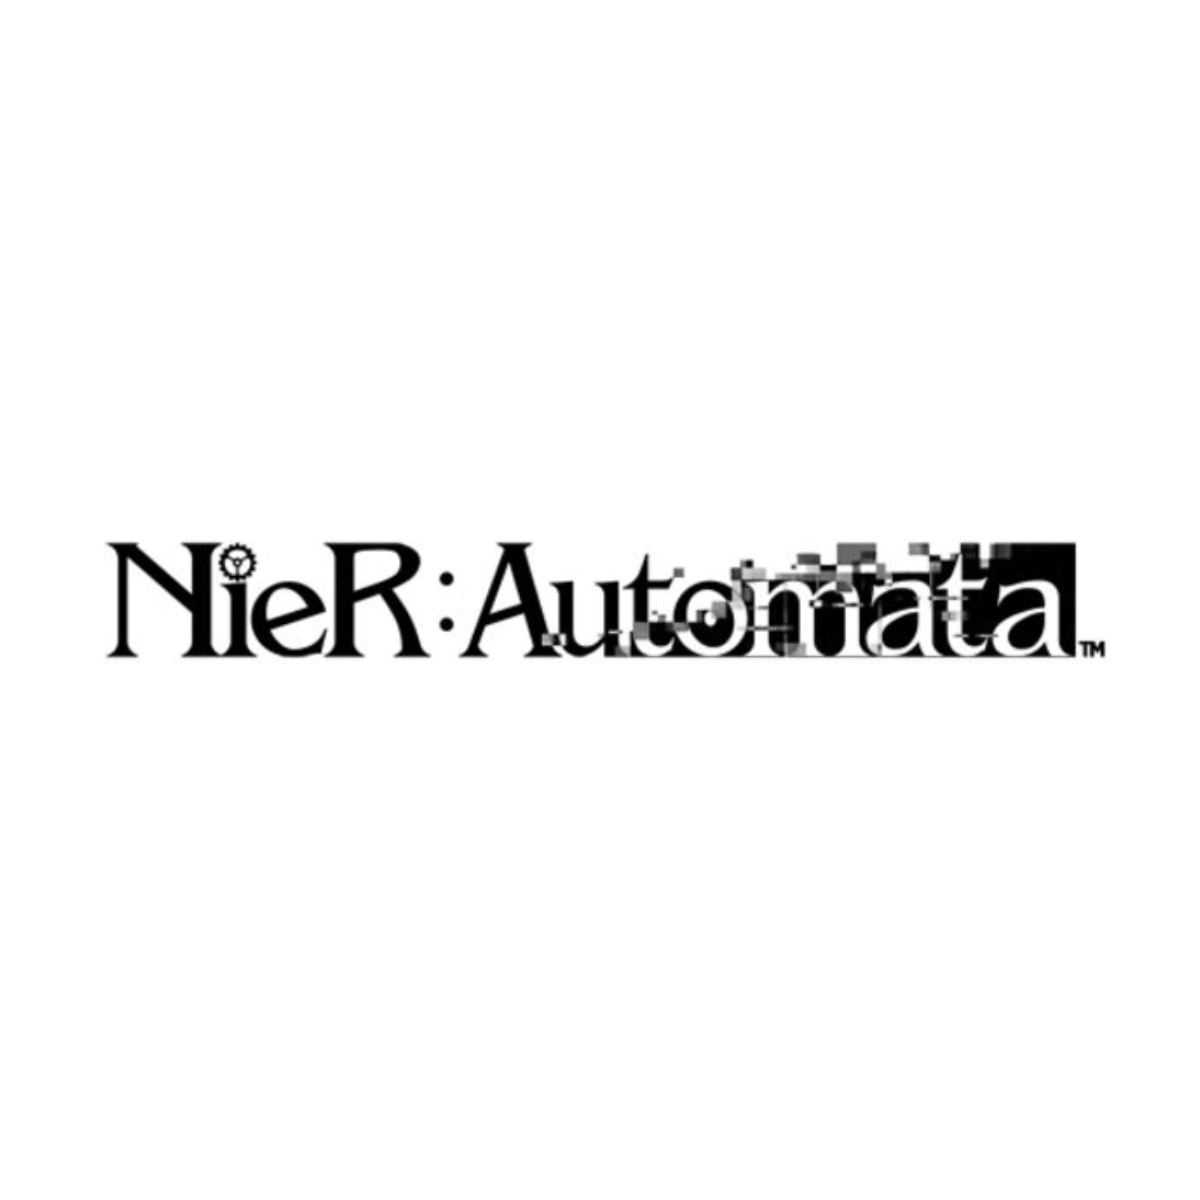 Movic Chara Sleeve Matte Series - Nier: Automata Ver1.1a - &quot;2B&quot; (MT1627)-Bushiroad-Ace Cards &amp; Collectibles